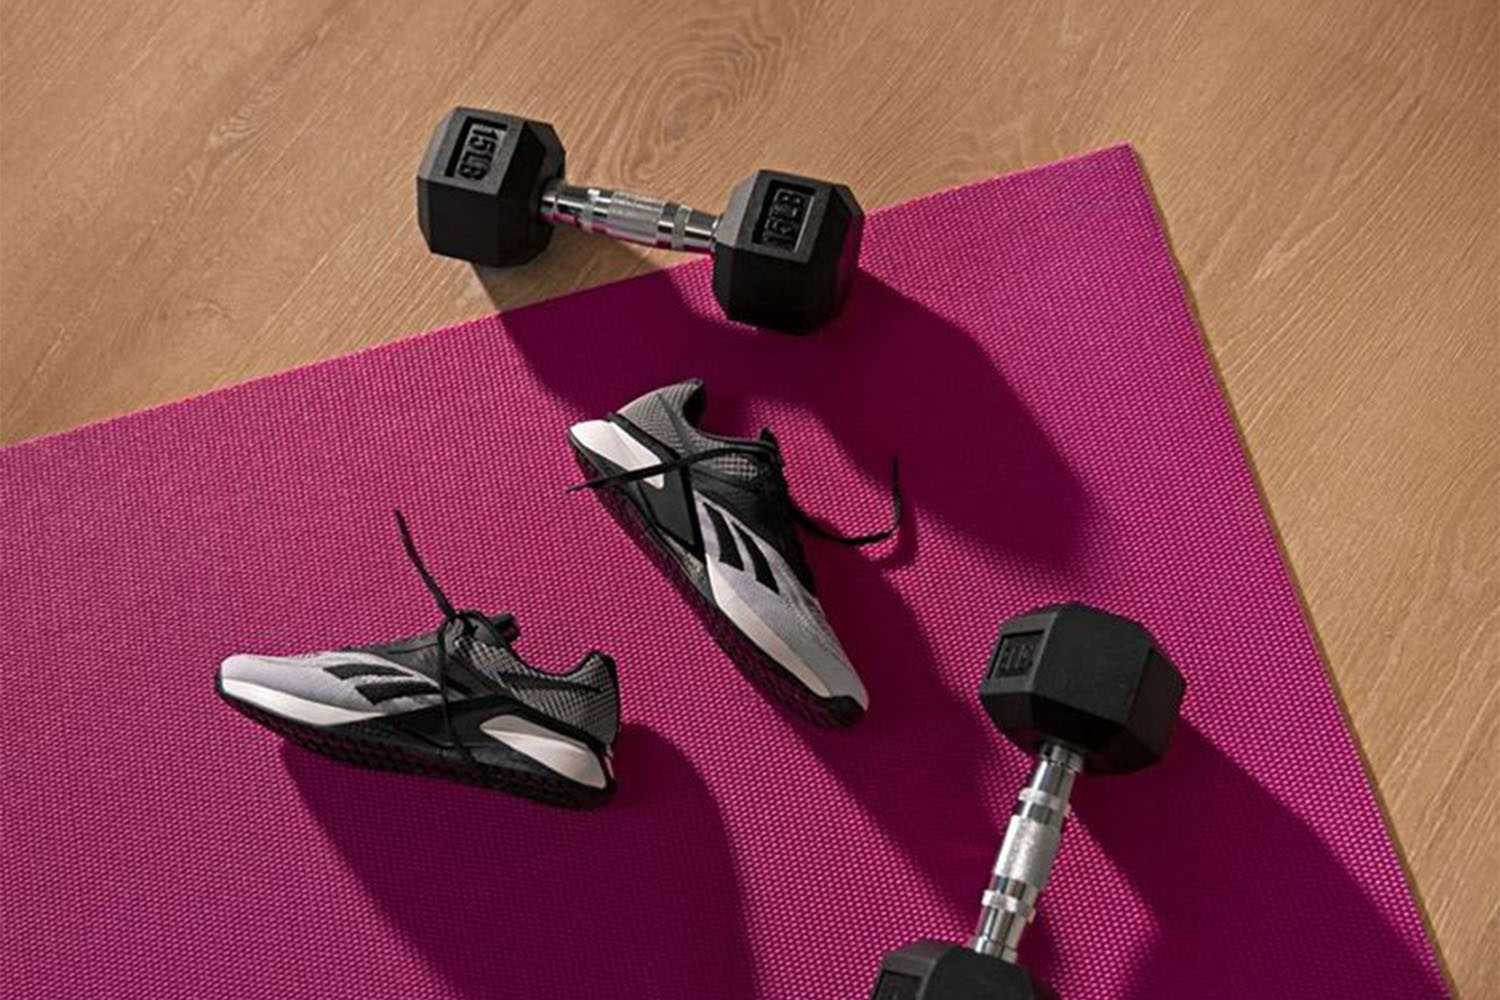 a pair fo sneakers on a yoga mat with weights